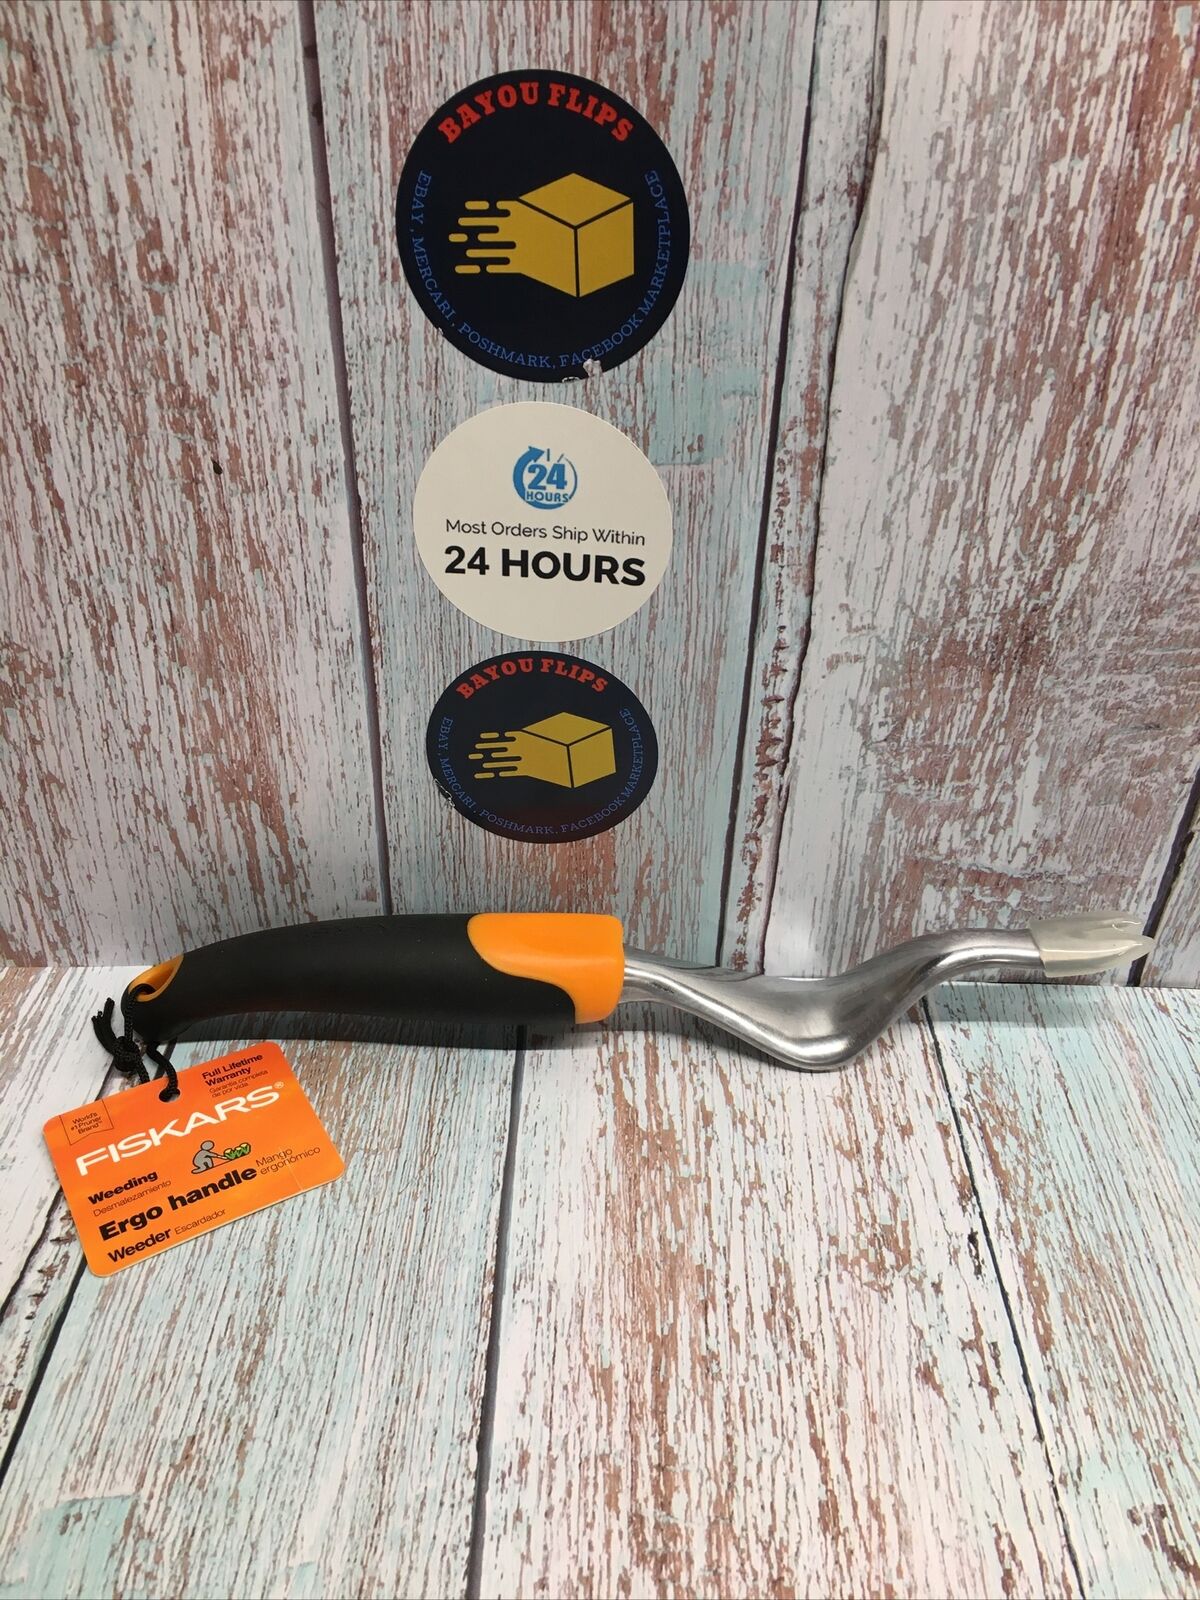 Fiskars Weed Puller Review The Ultimate Solution for Effortless Weed Removal